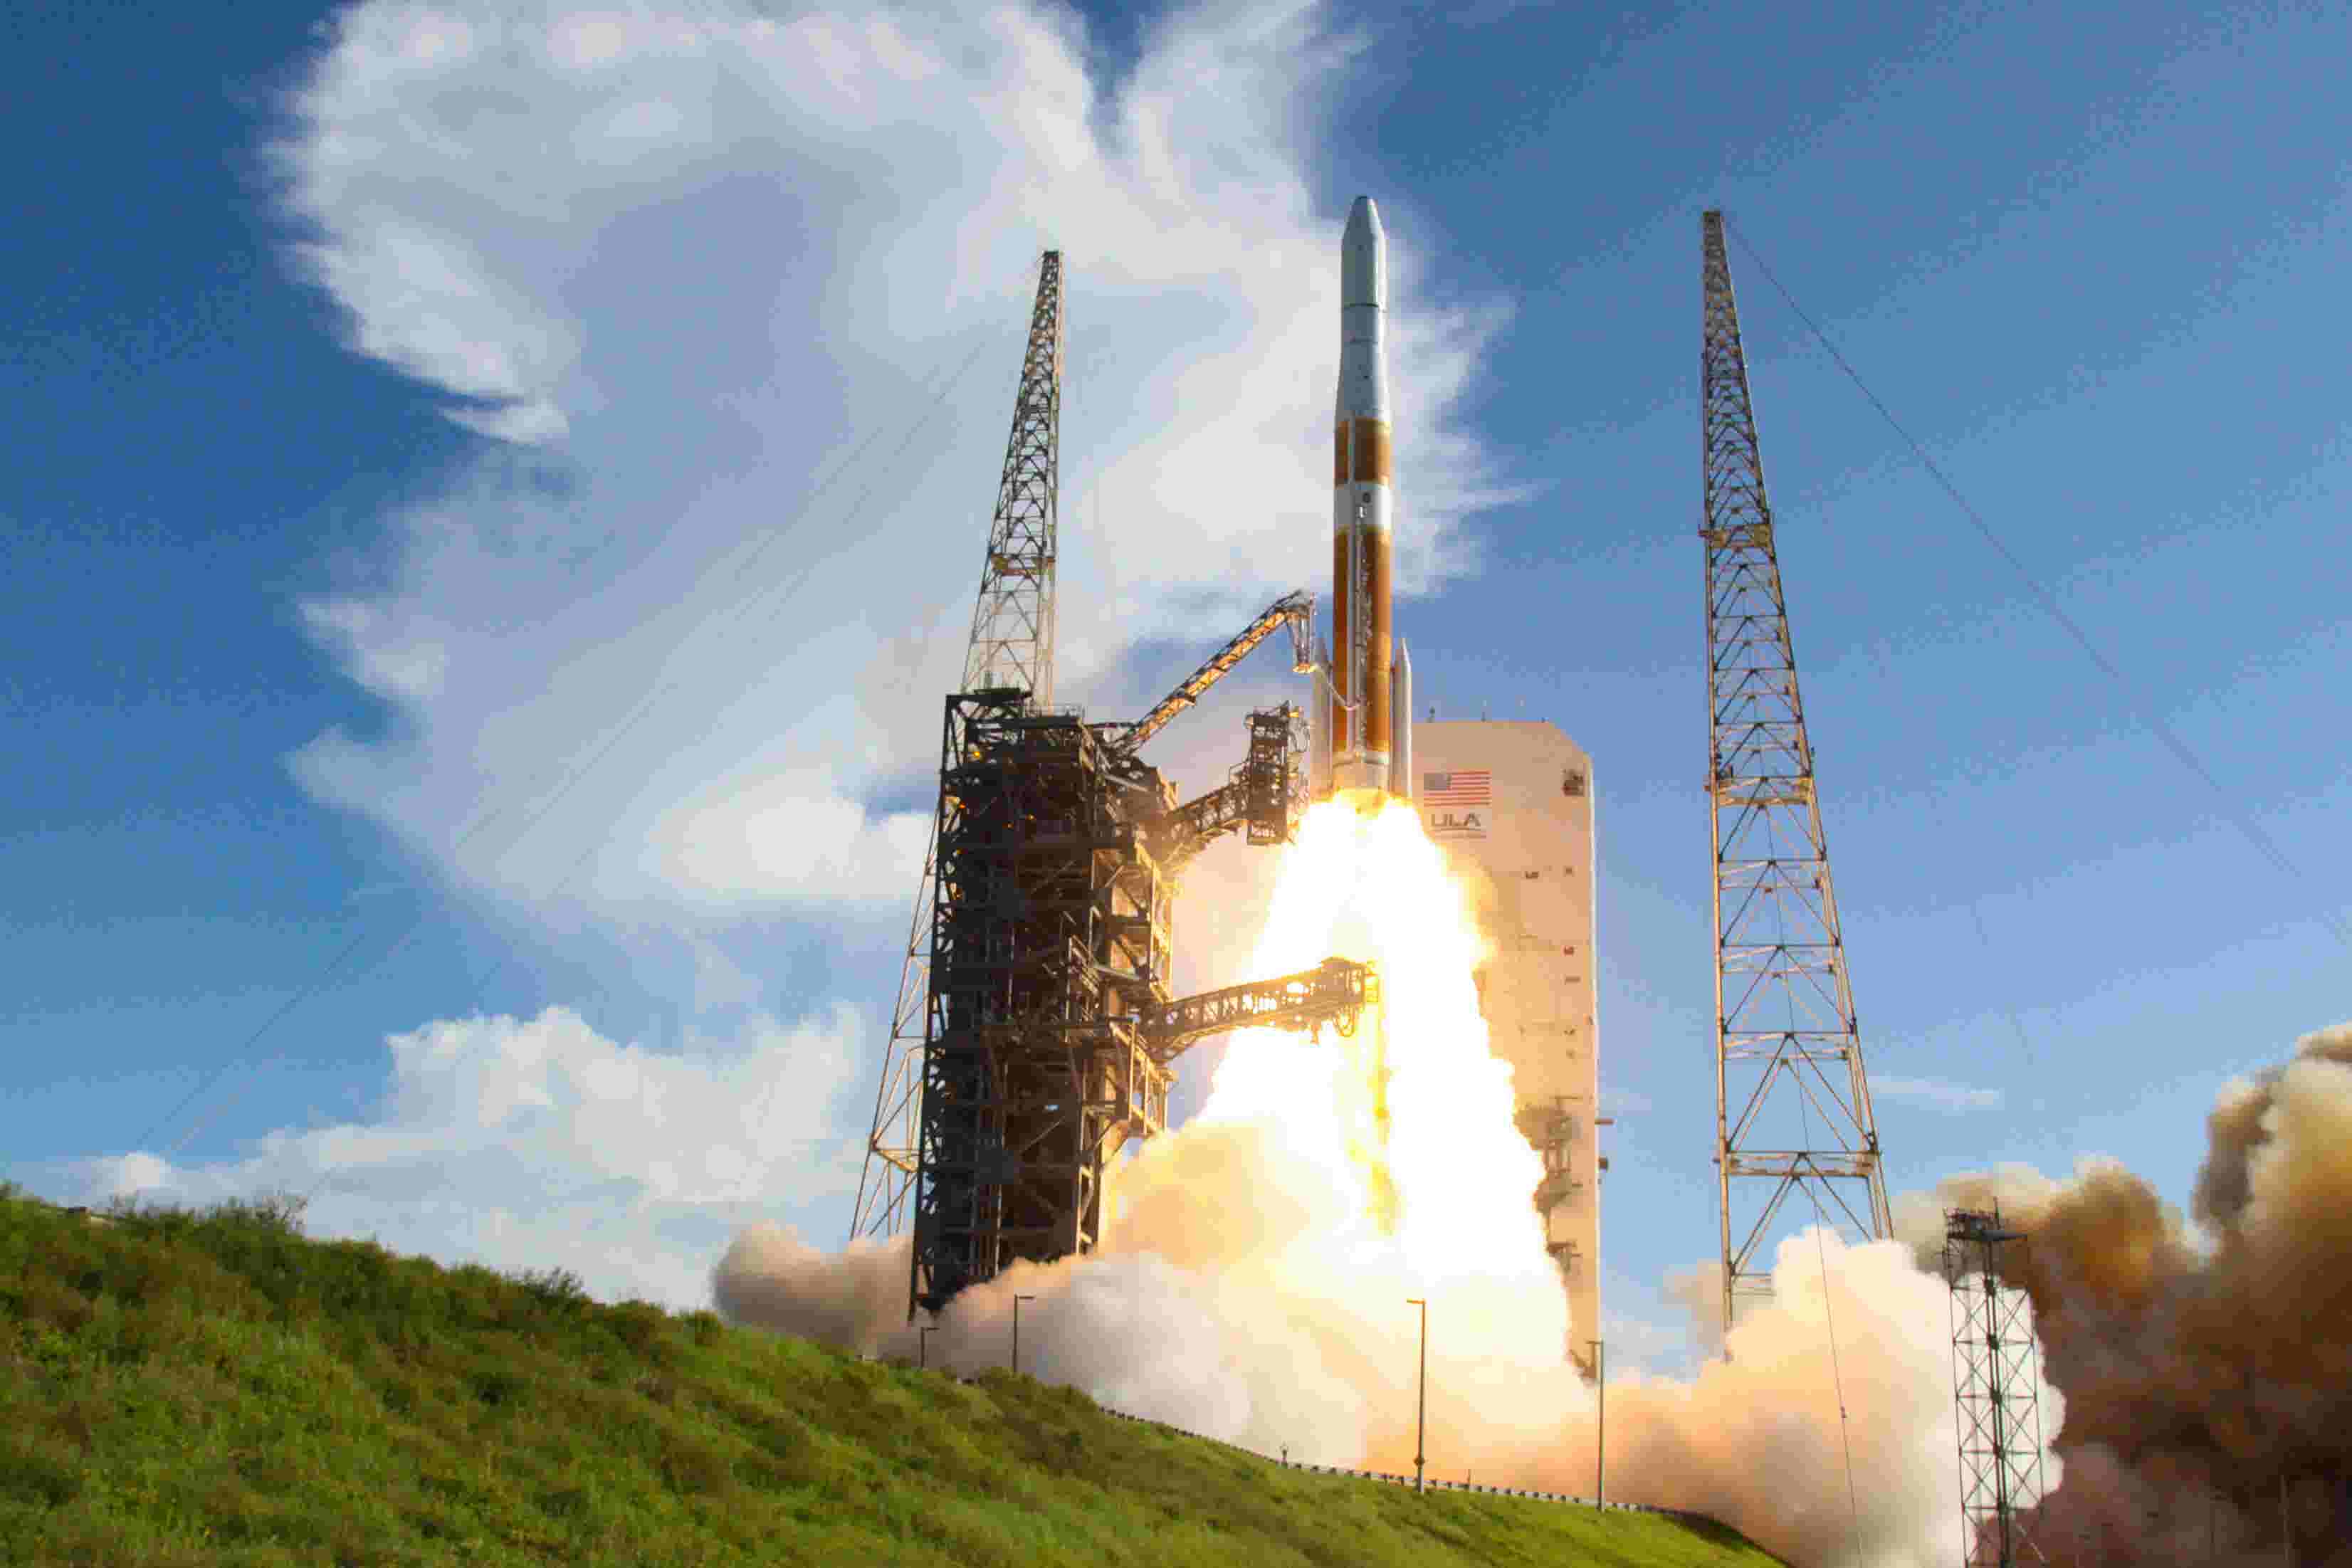 See all 2019 Space Coast rocket launches